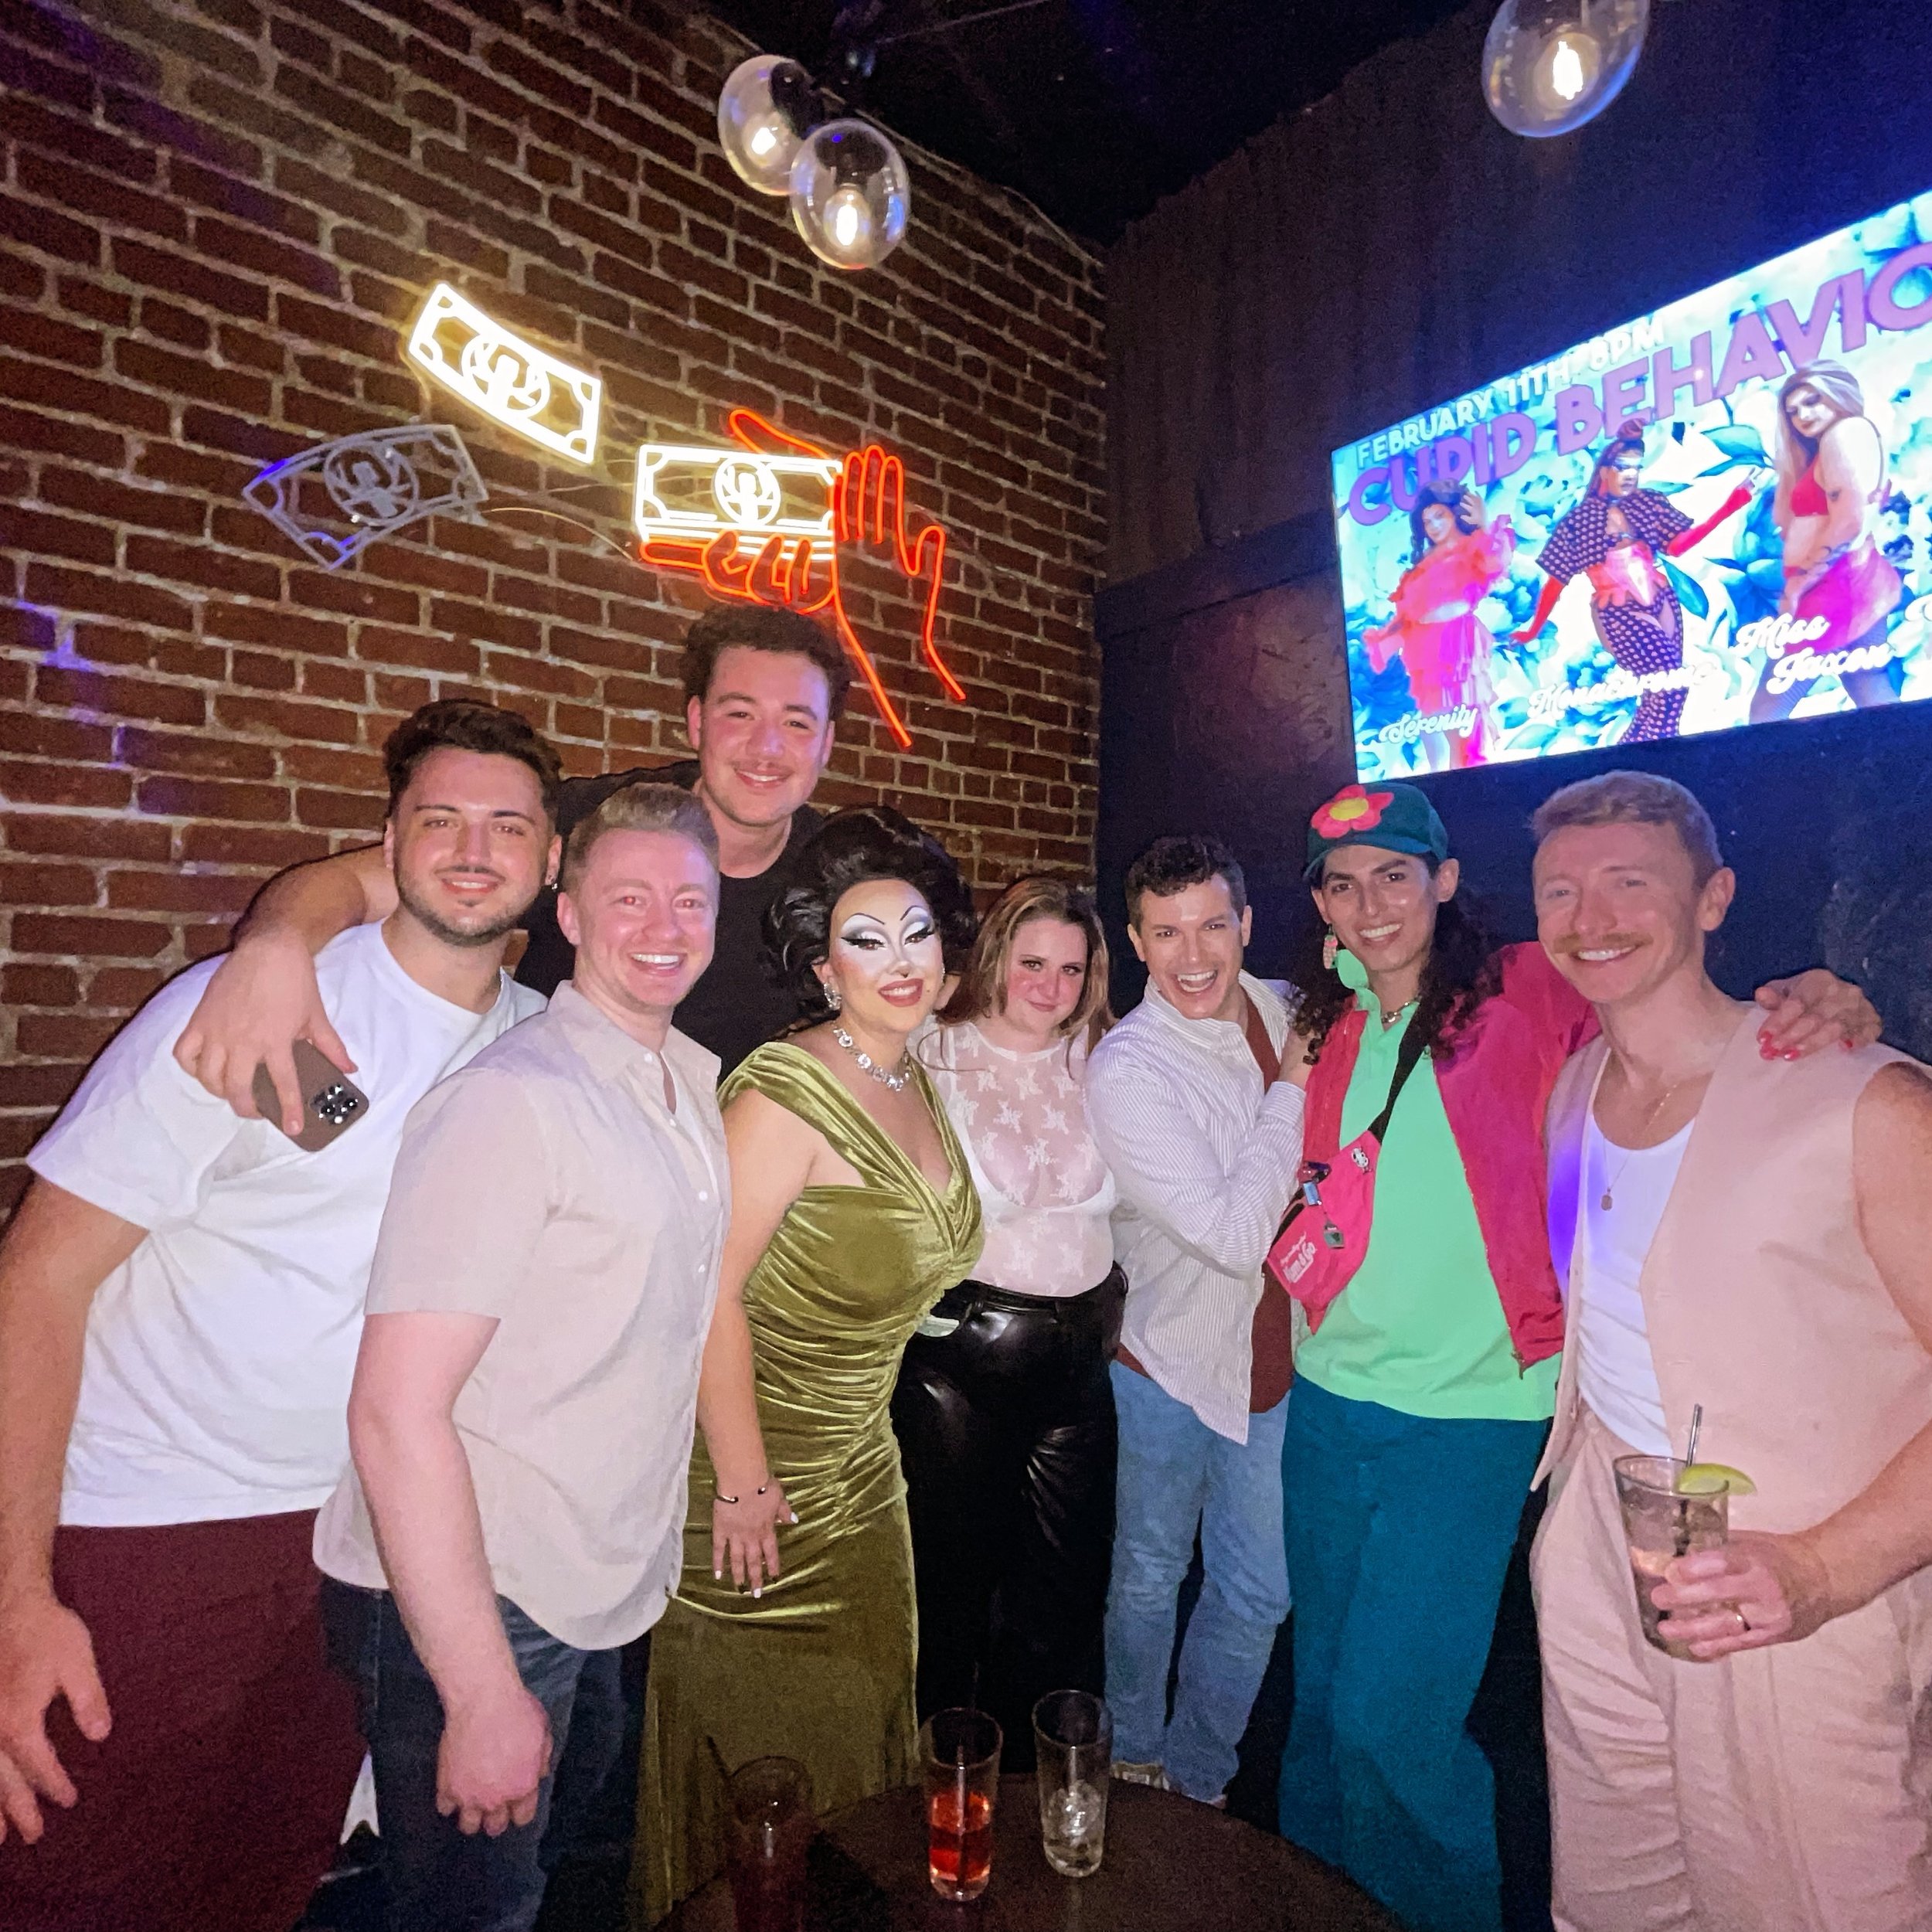 This weekend Stag had the pleasure of hosting Rupauls Drag Race Contestant @crystalmethyd 

Con-drag-ulations on completing another fantastic night of &ldquo;Crystal Methyd: Inside the Enchanted Forest.&rdquo; We hope you enjoyed your time with us as